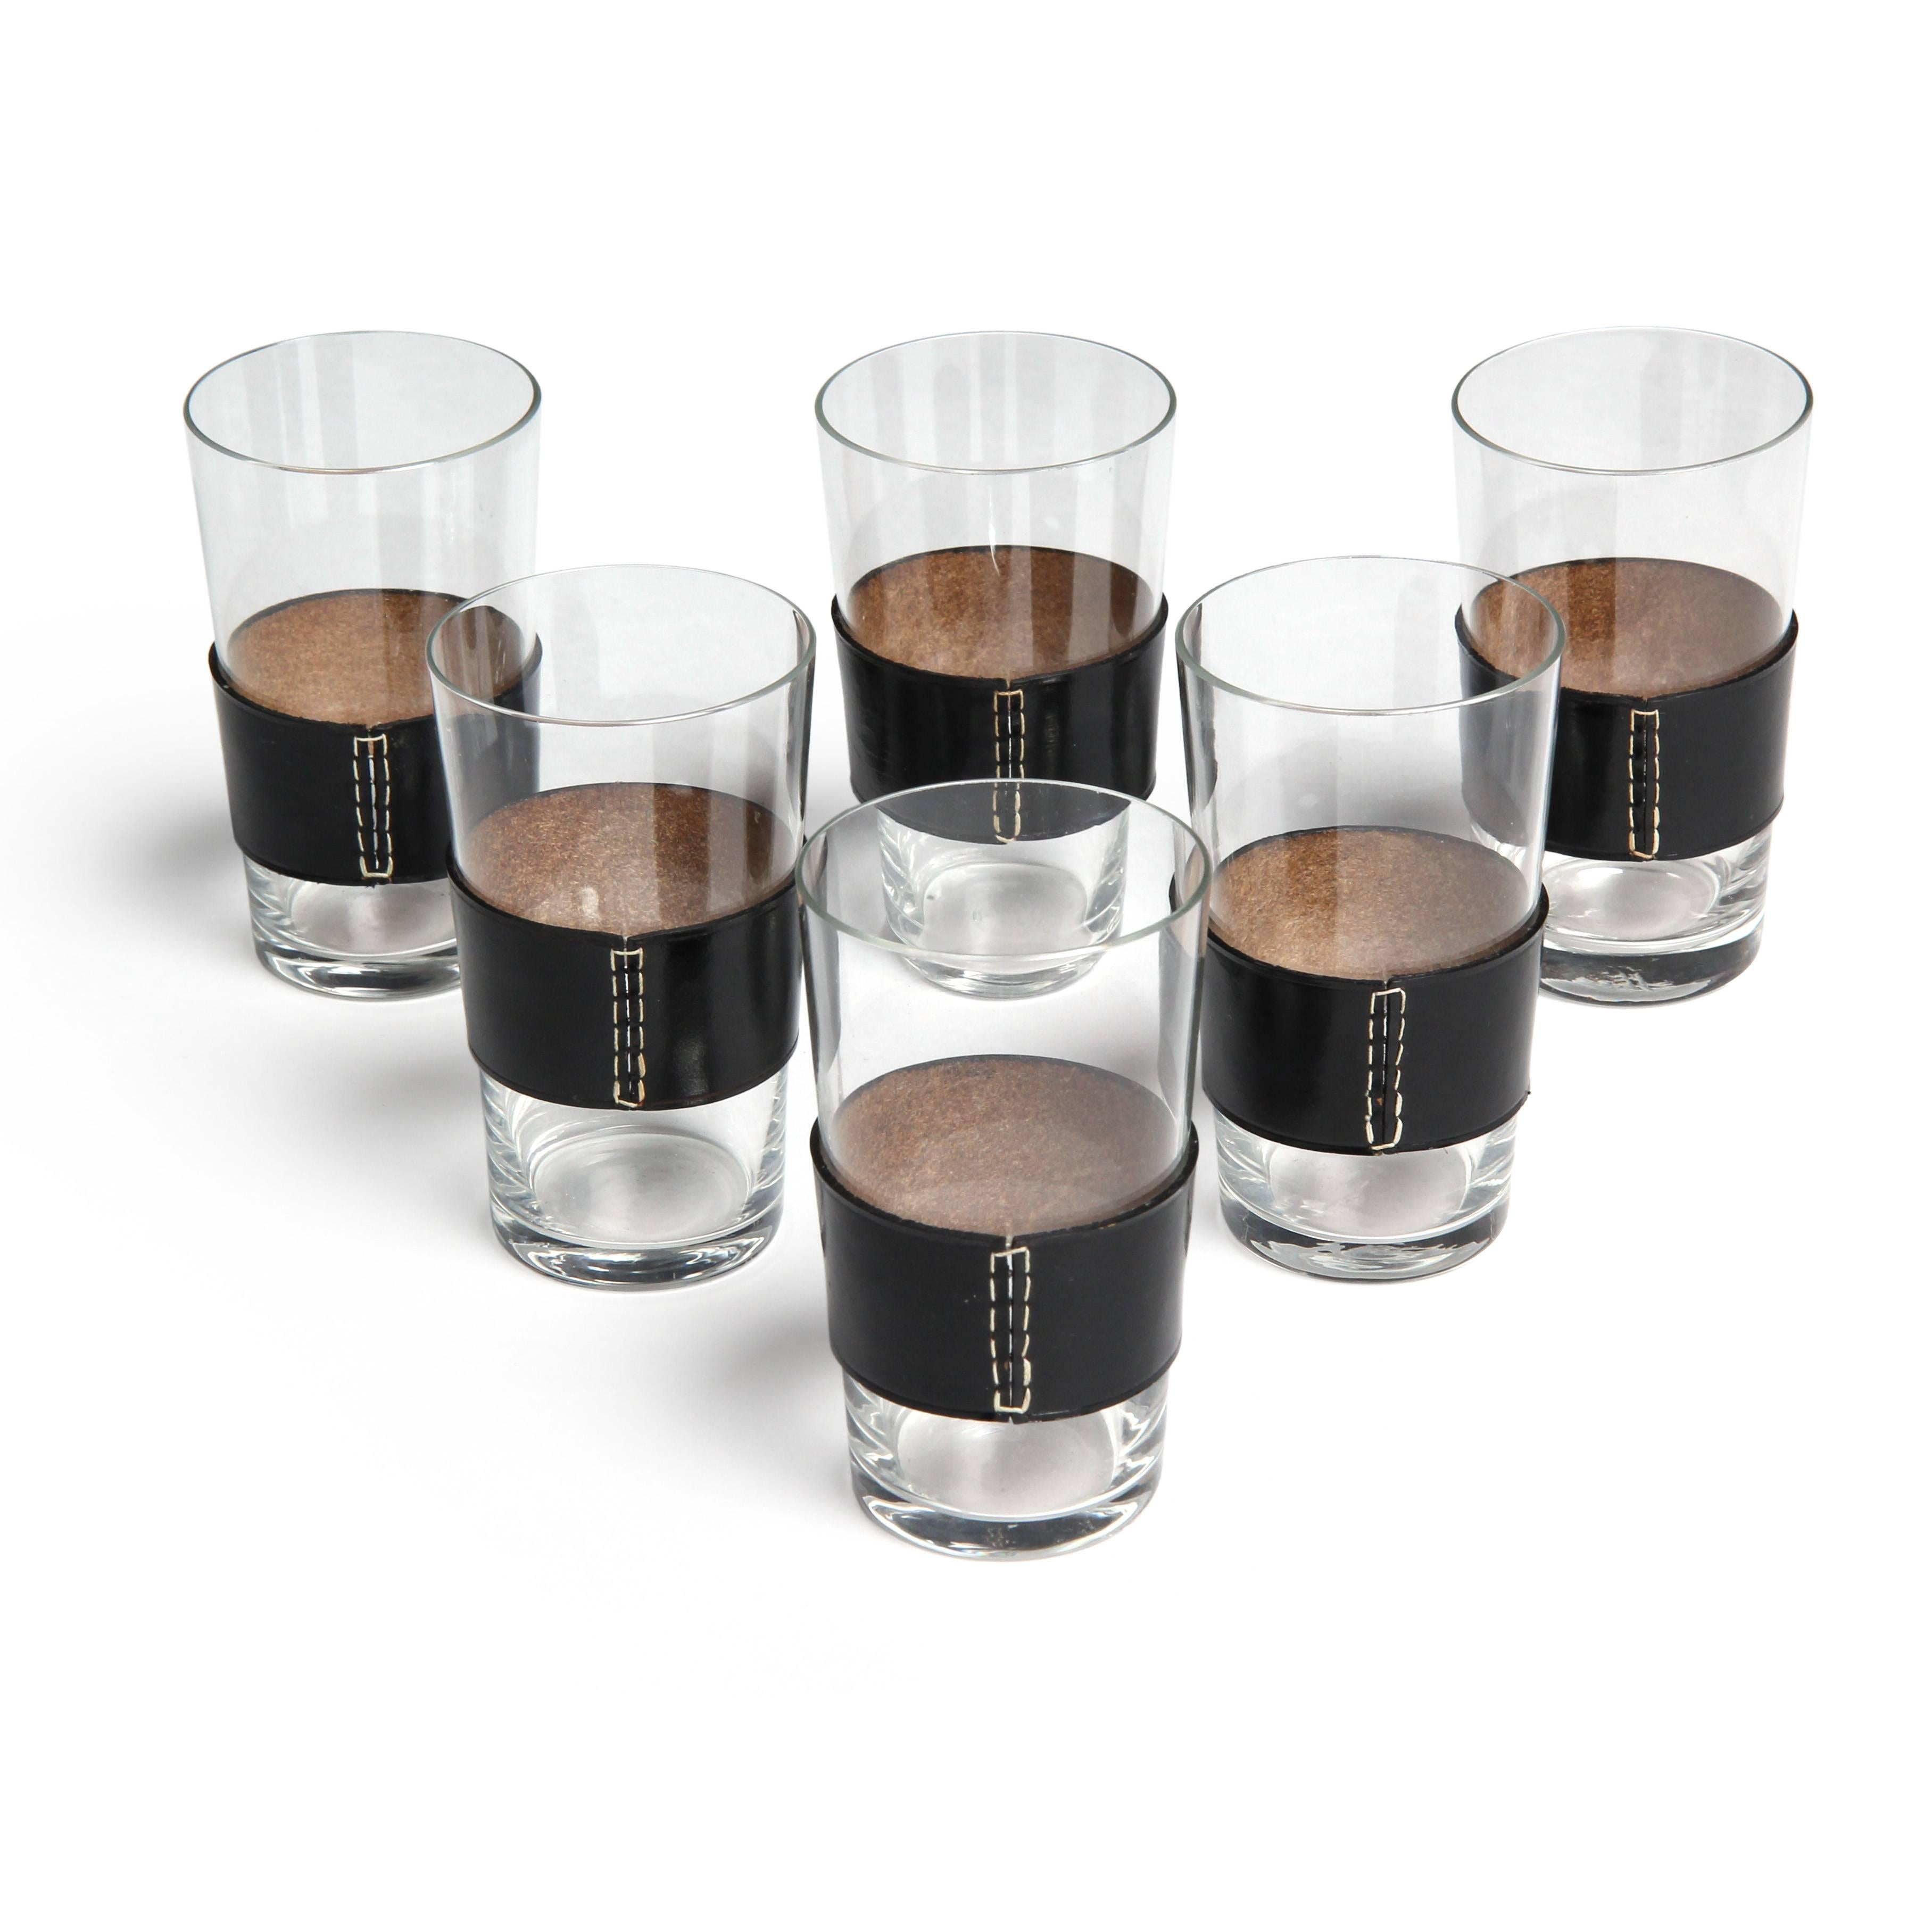 A refined glass pitcher and six (6) glasses, having hand-stitched black leather sleeves and integrated handle on the pitcher.